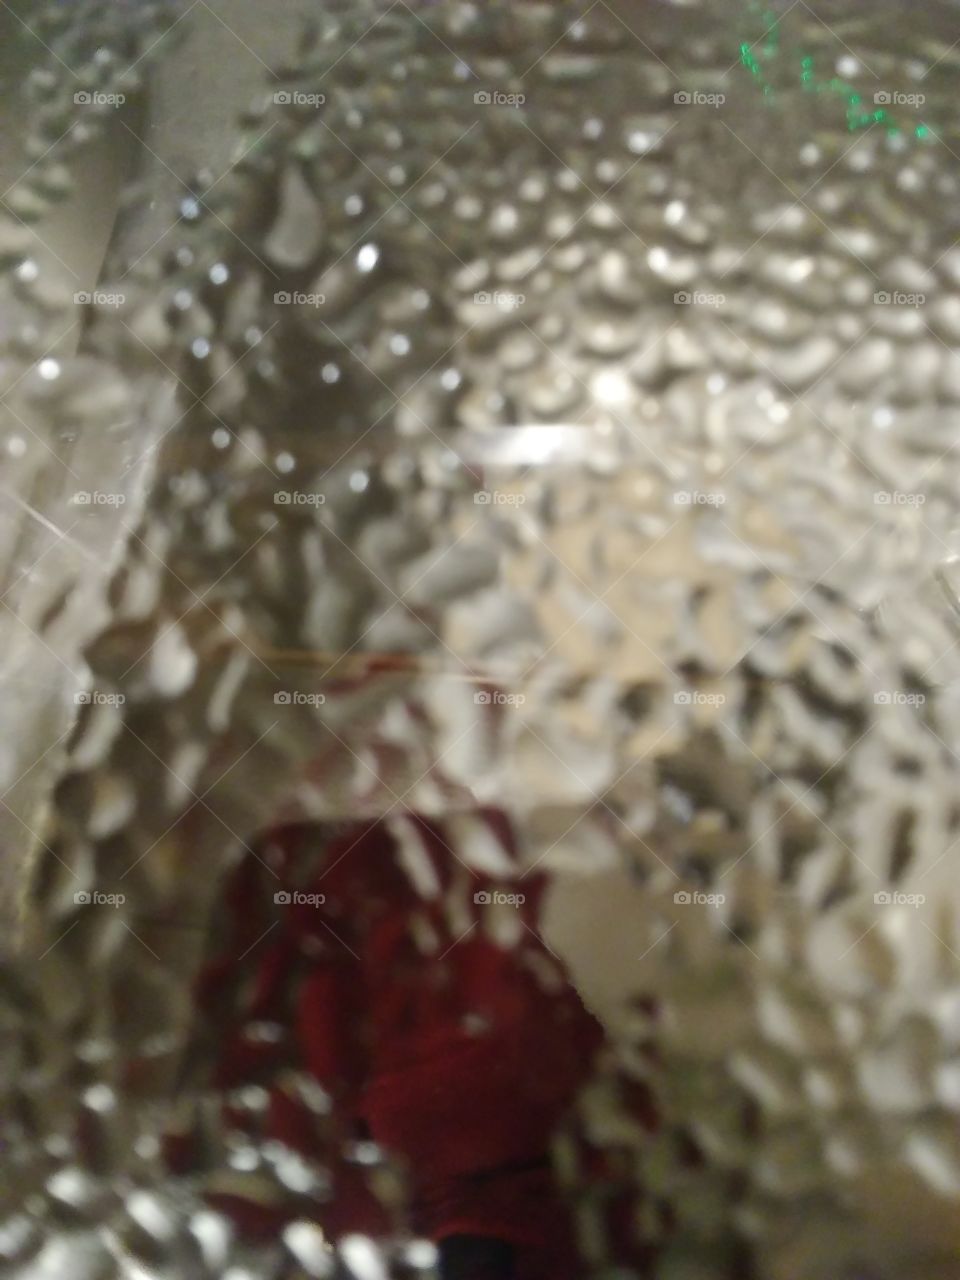 view of the sink through a glass lid